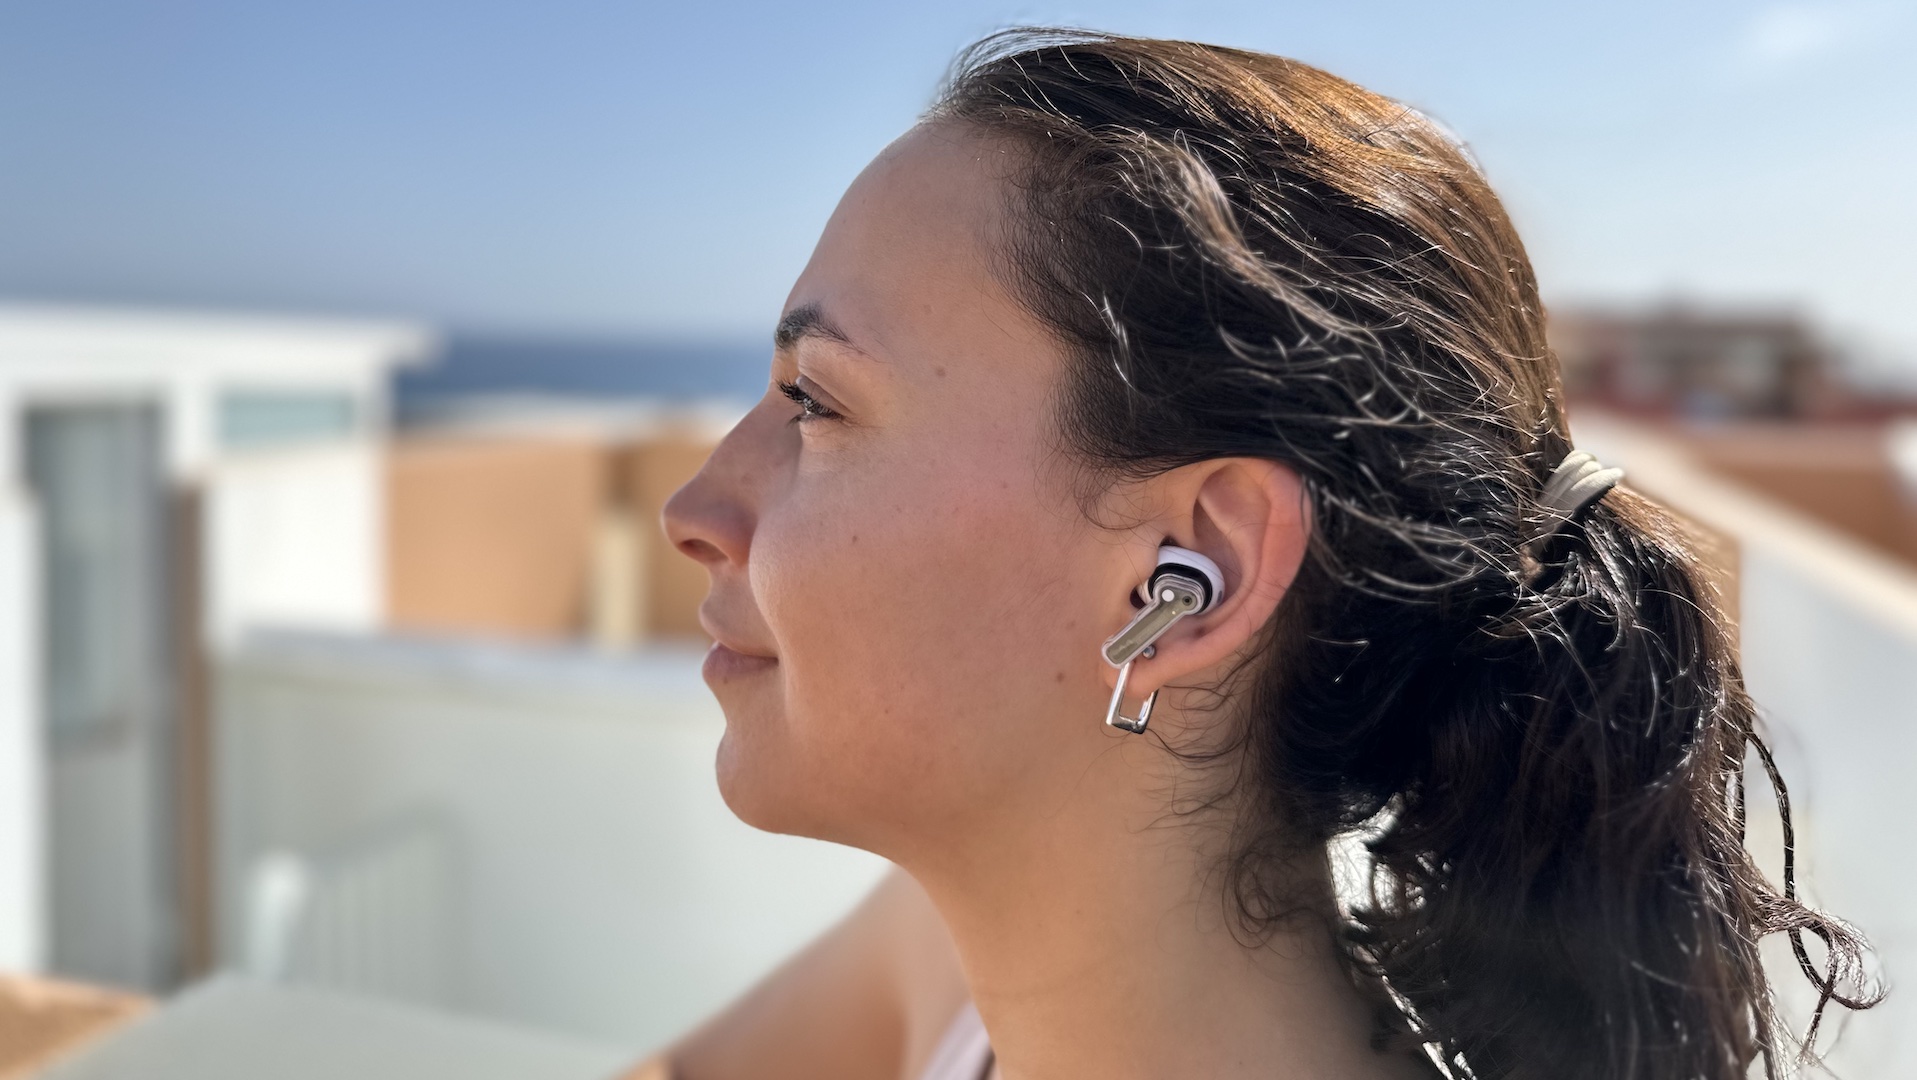 Review: Nothing Ear (stick)  Nothing's New Earbuds Are Worthy Of Their Name